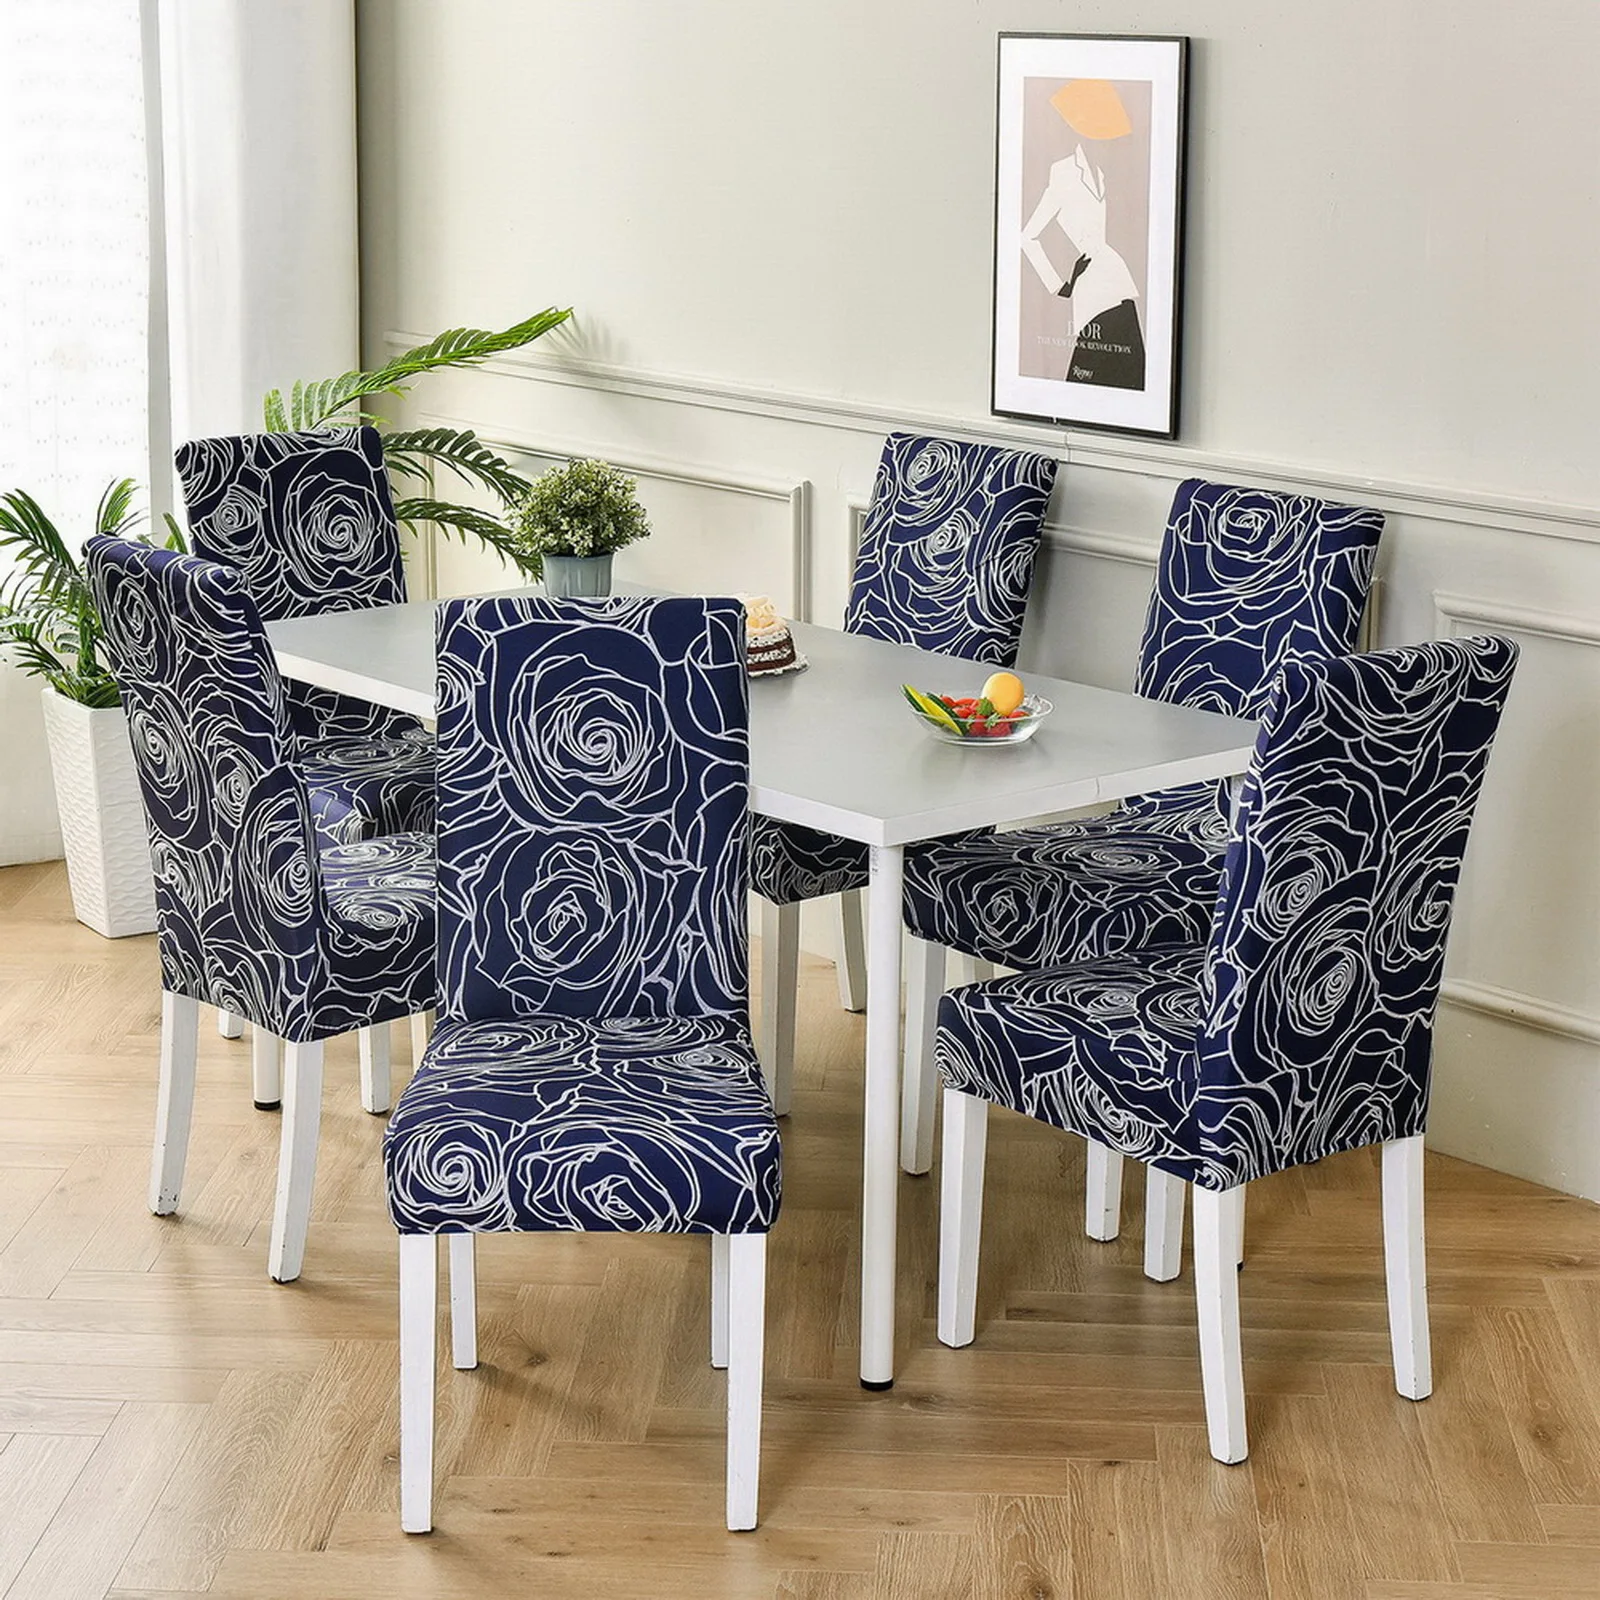 1pc Printed Elastic Stretch Chair Cover Spandex Dinning Room